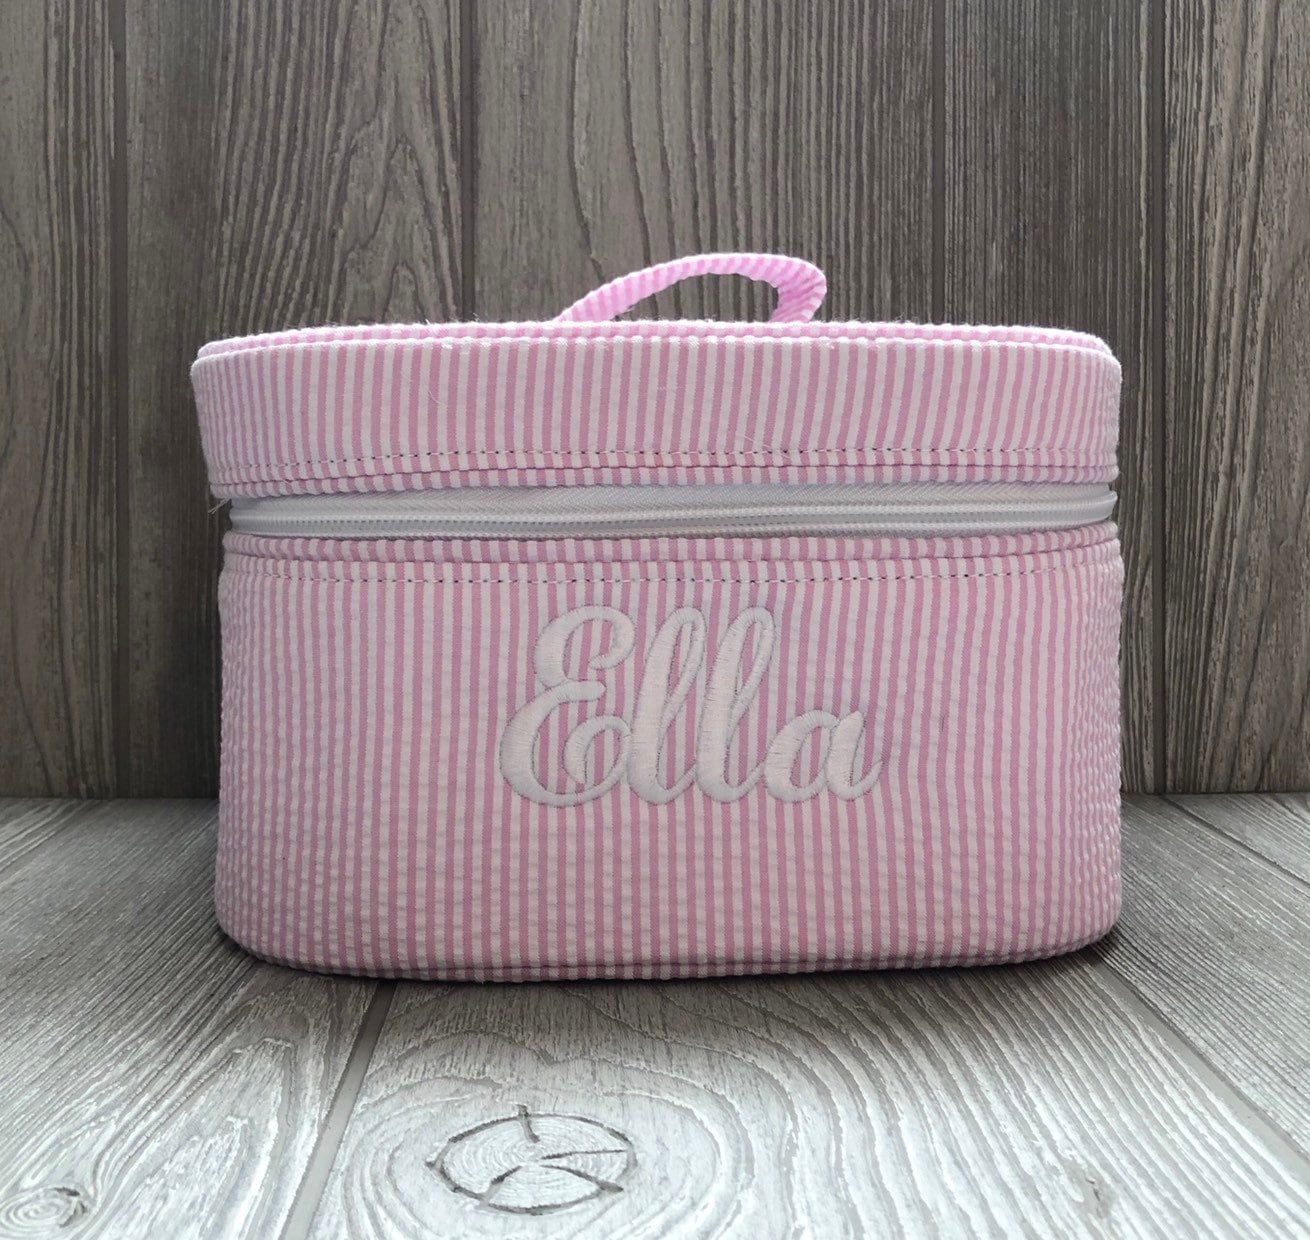 Monogrammed MakeUp Bag Make Up Bag Cosmetic Bag Train Case Seersucker Cosmetic  Bag -Bridesmaid Gift -Toiletry Bag-Gifts for Her-Personalized